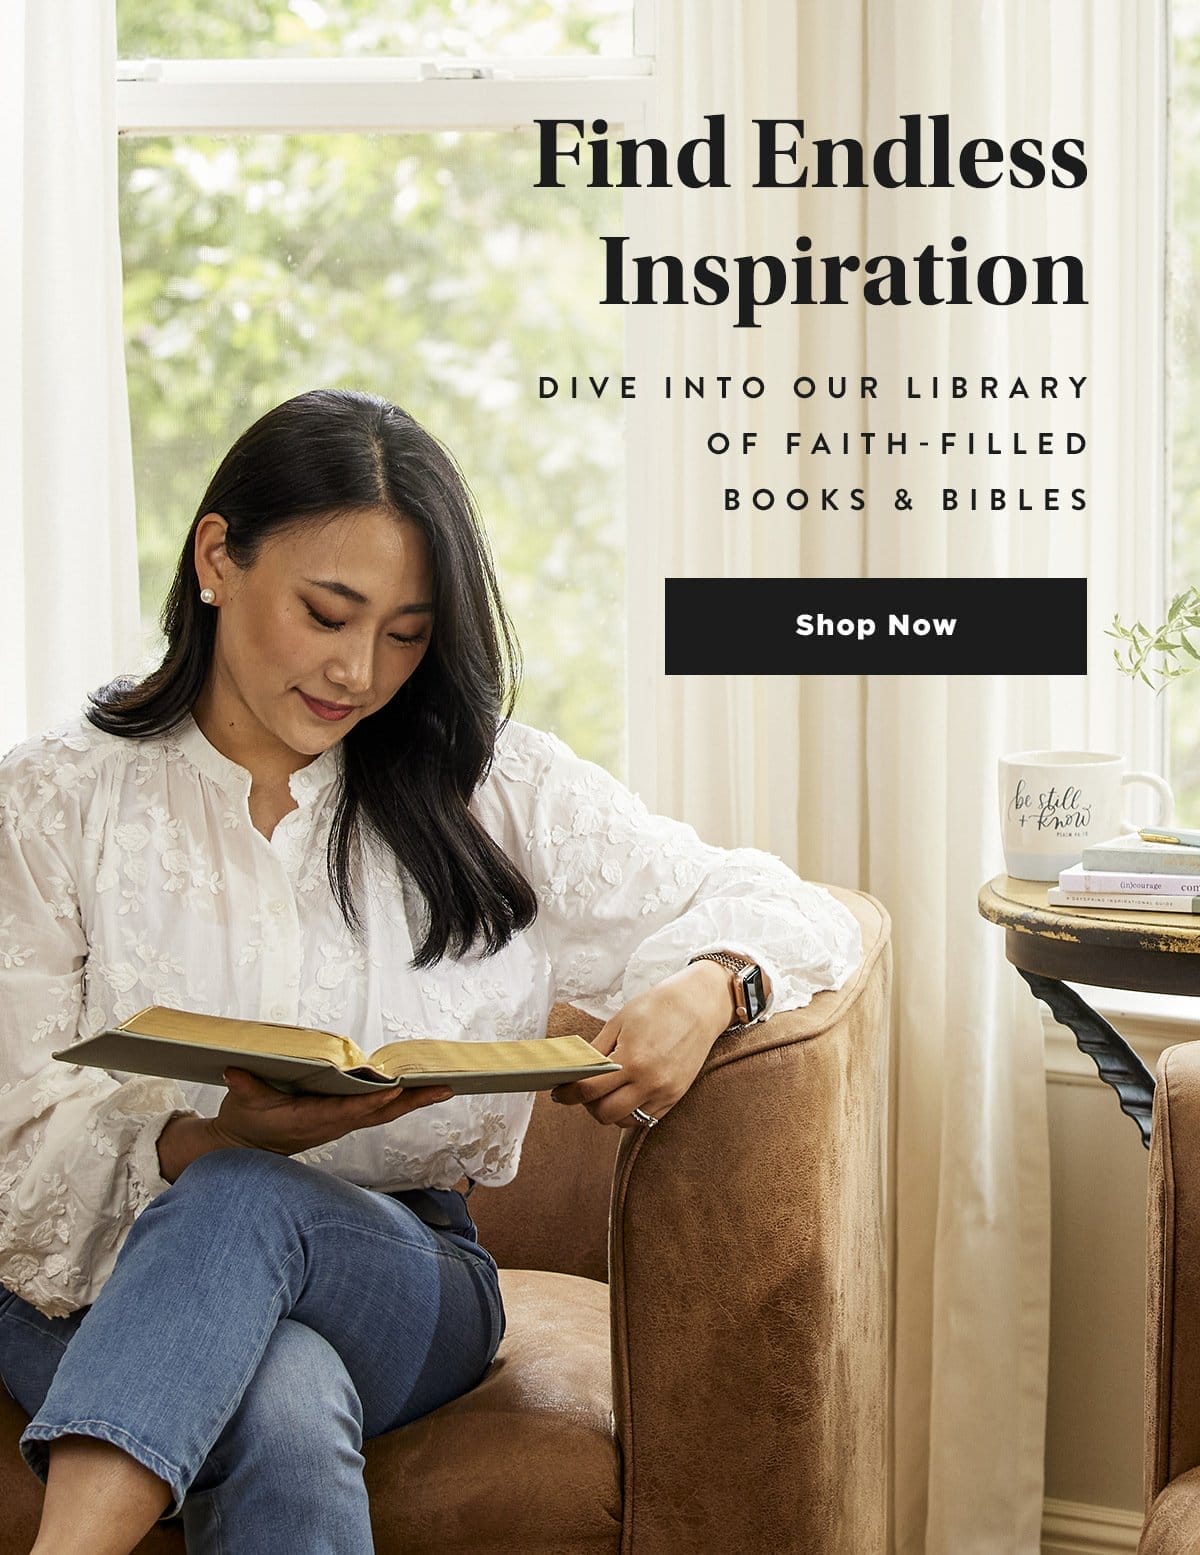 Find Endless Inspiration Dive into our Library of Faith-Filled Books & Bibles Shop Now